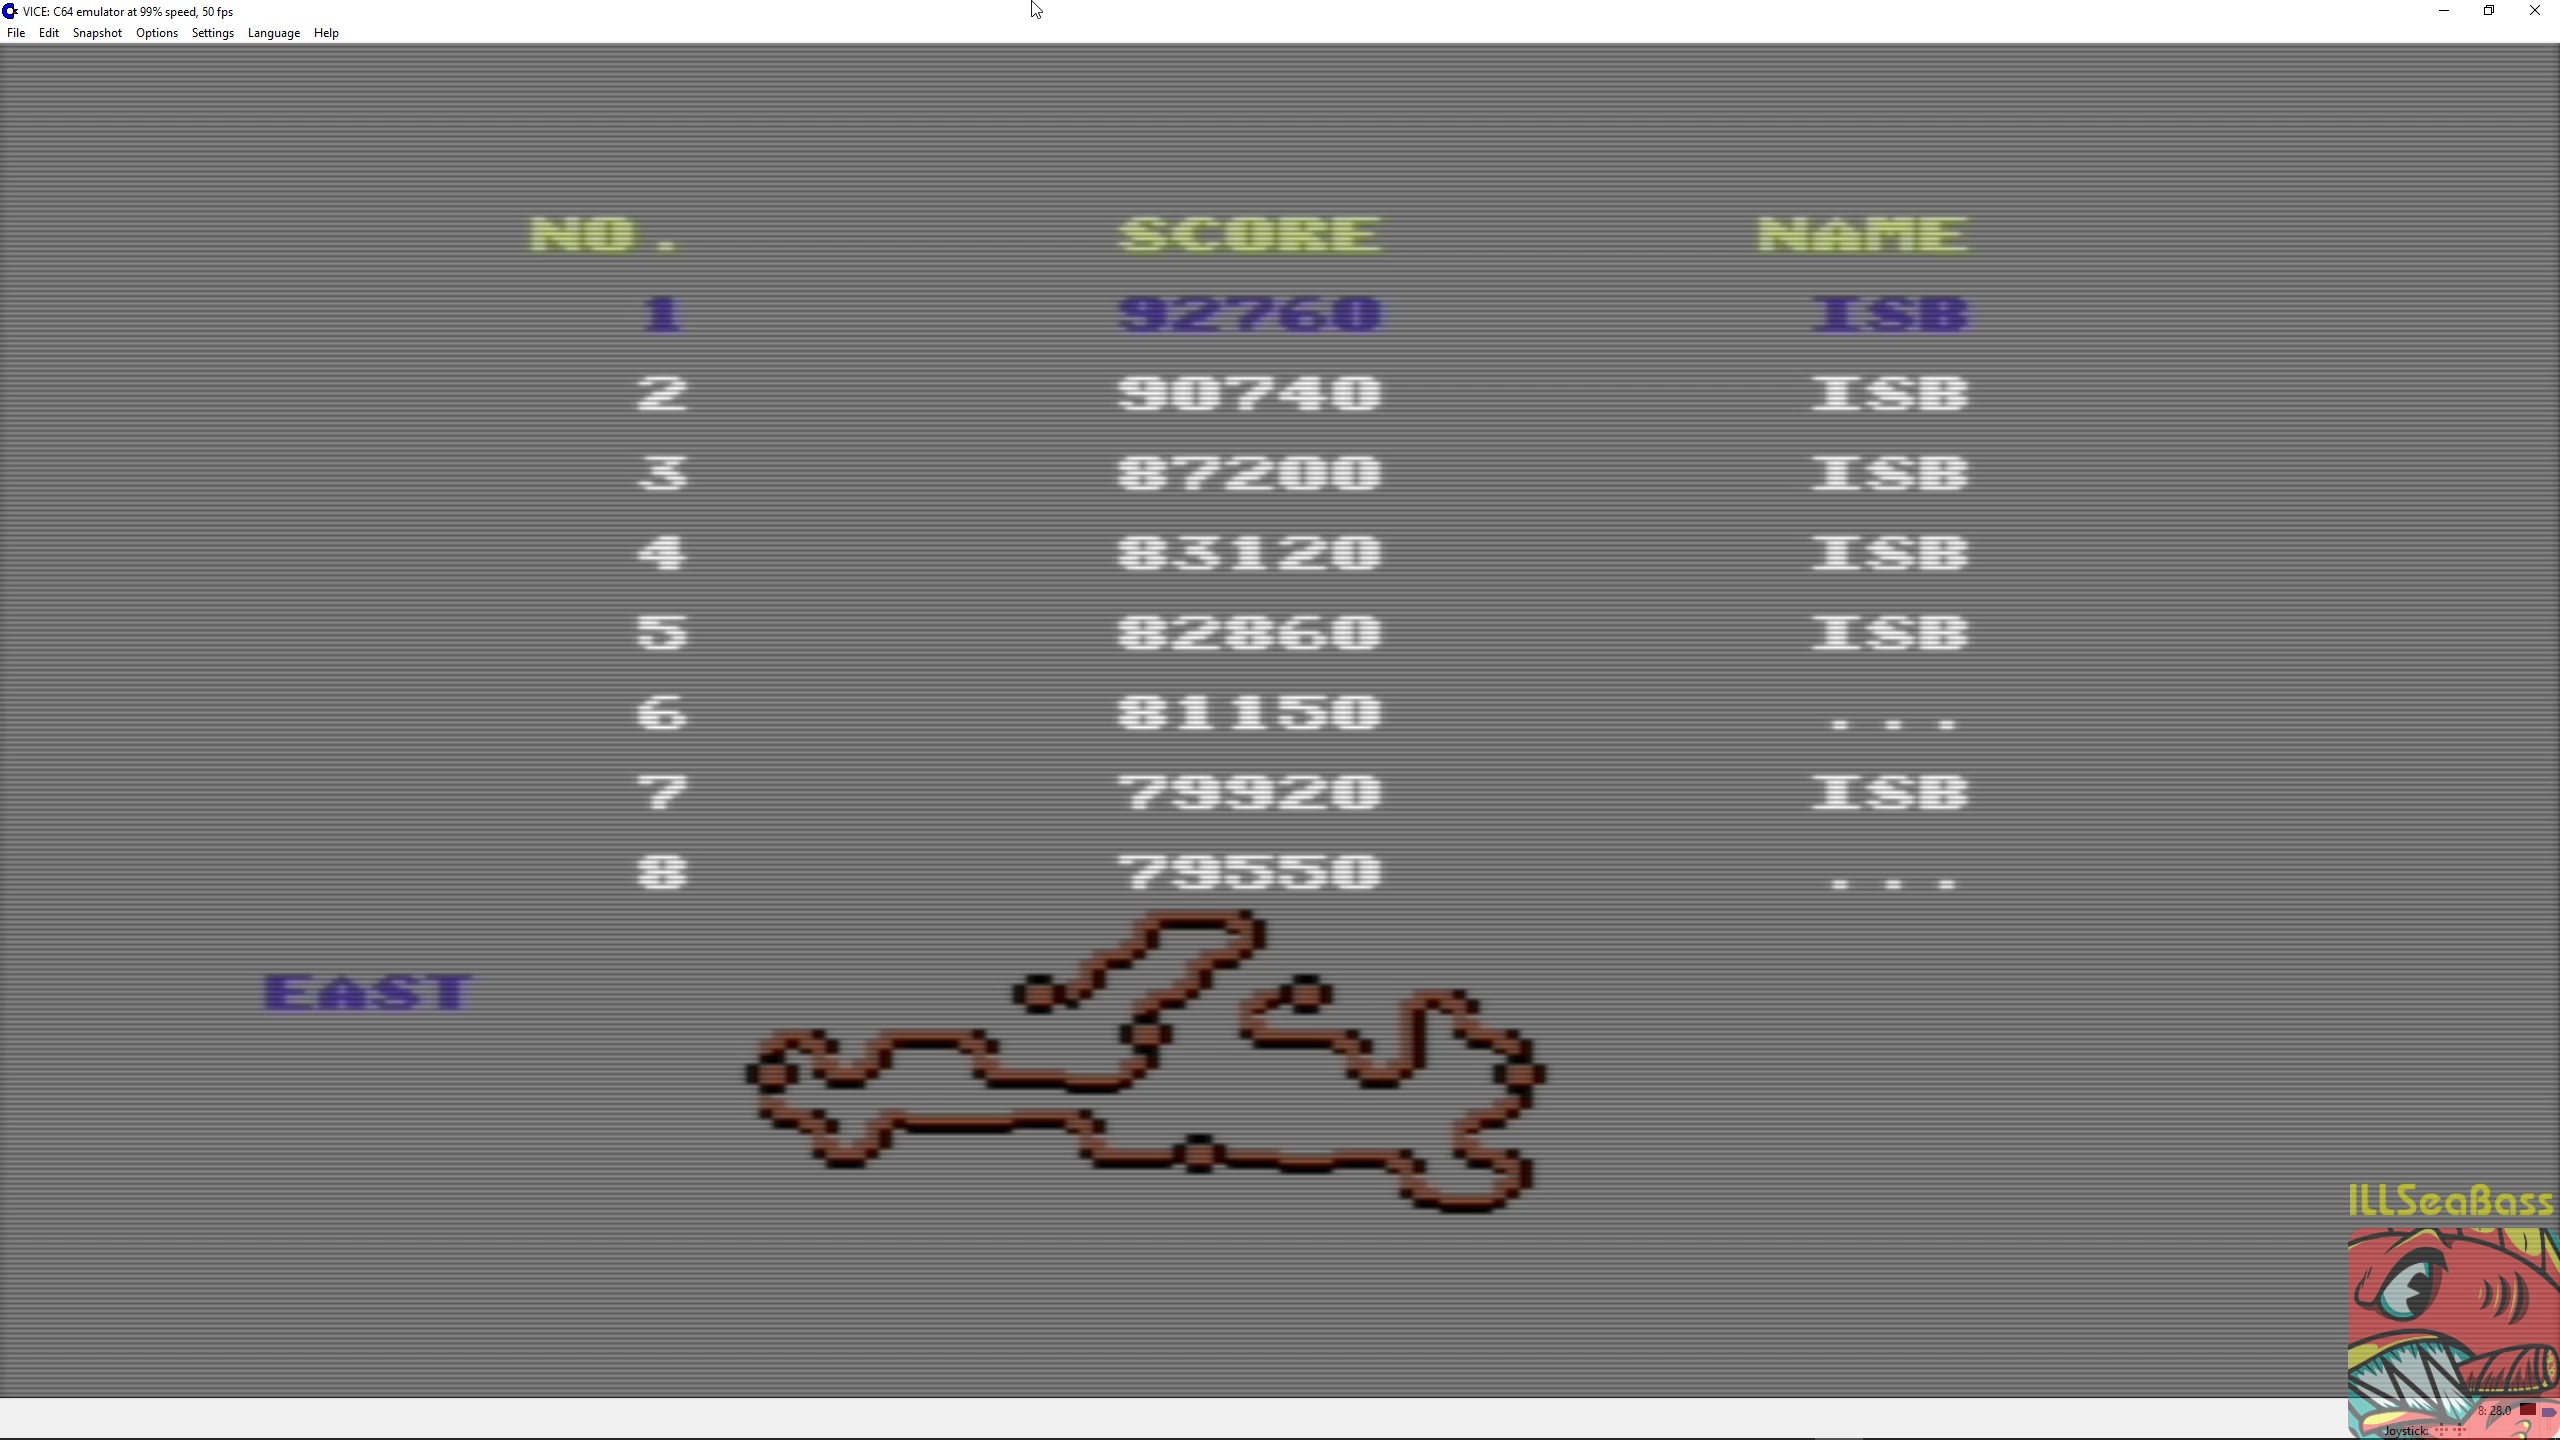 ILLSeaBass: Buggy Boy: East (Commodore 64 Emulated) 92,760 points on 2018-04-06 11:41:59